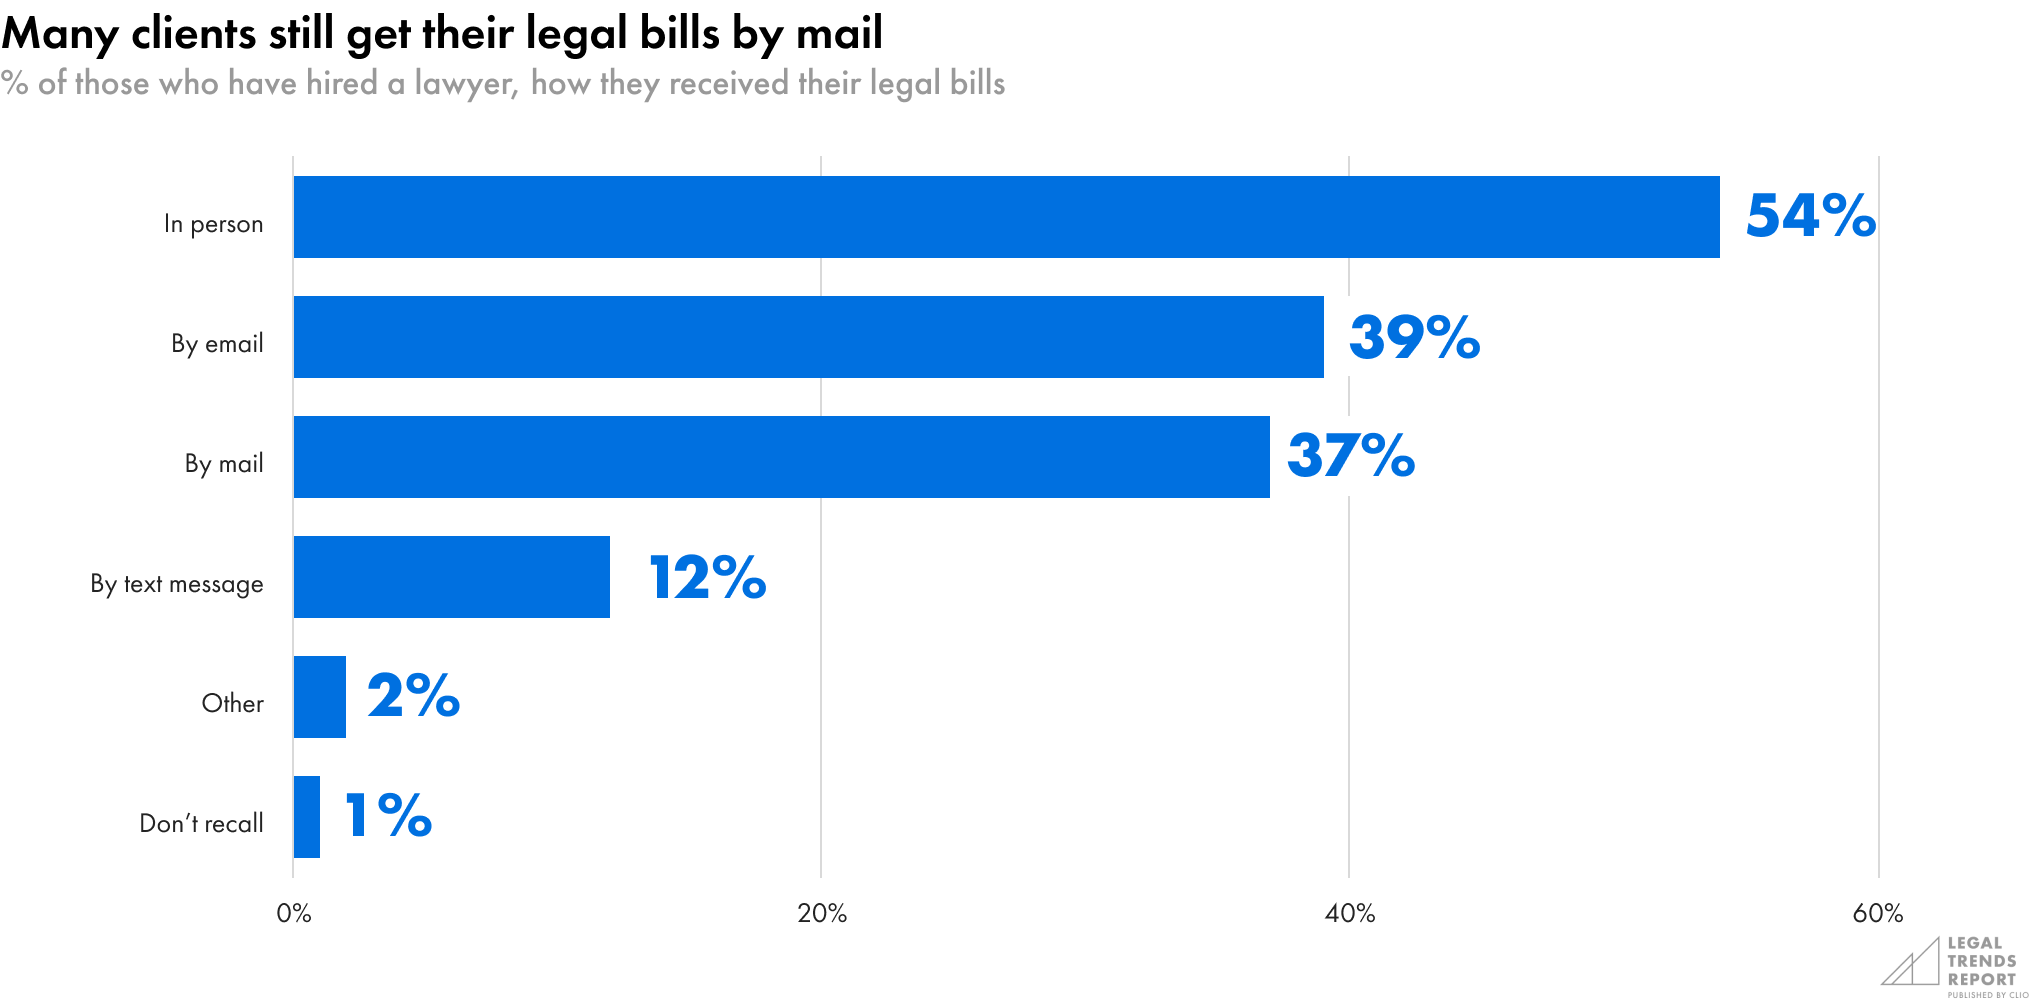 Many legal clients still get their bills by mail